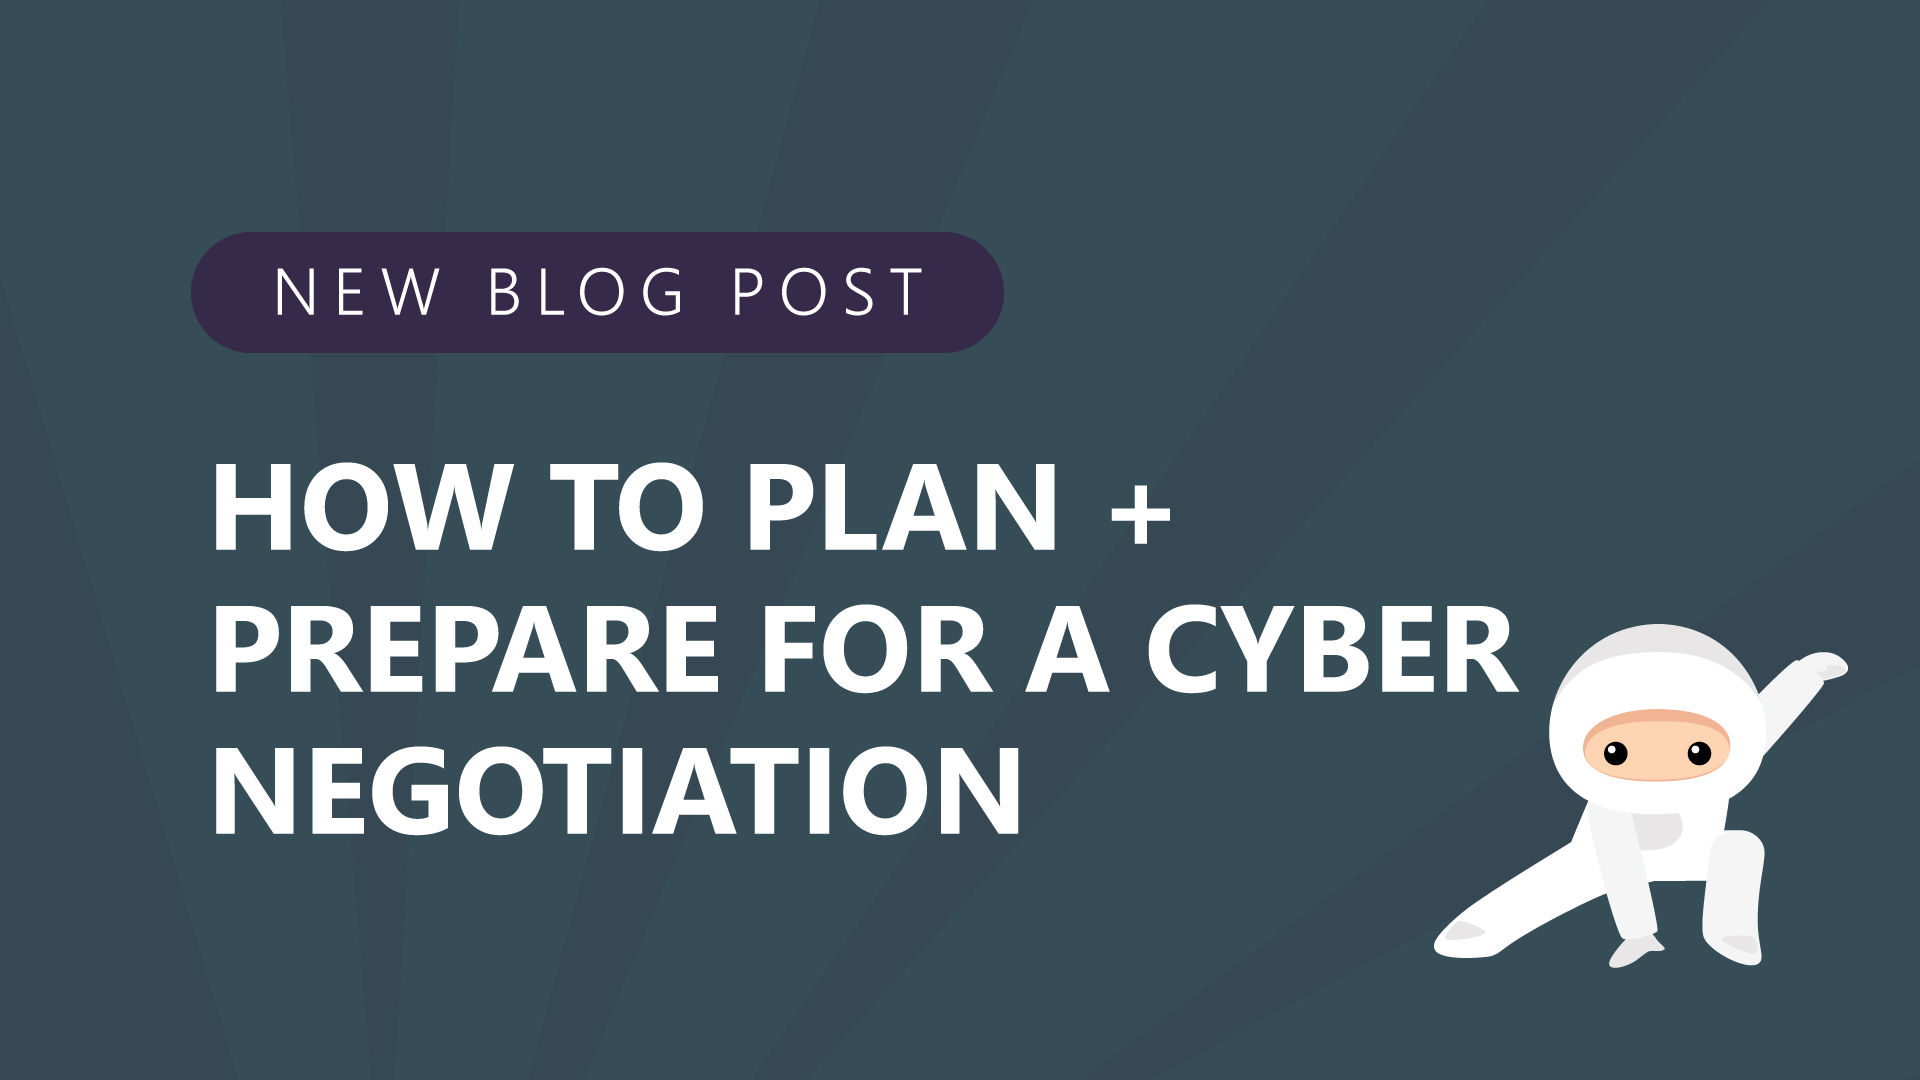 61-How-to-Plan-Prepare-for-a-Cyber-Negotiation.jpg